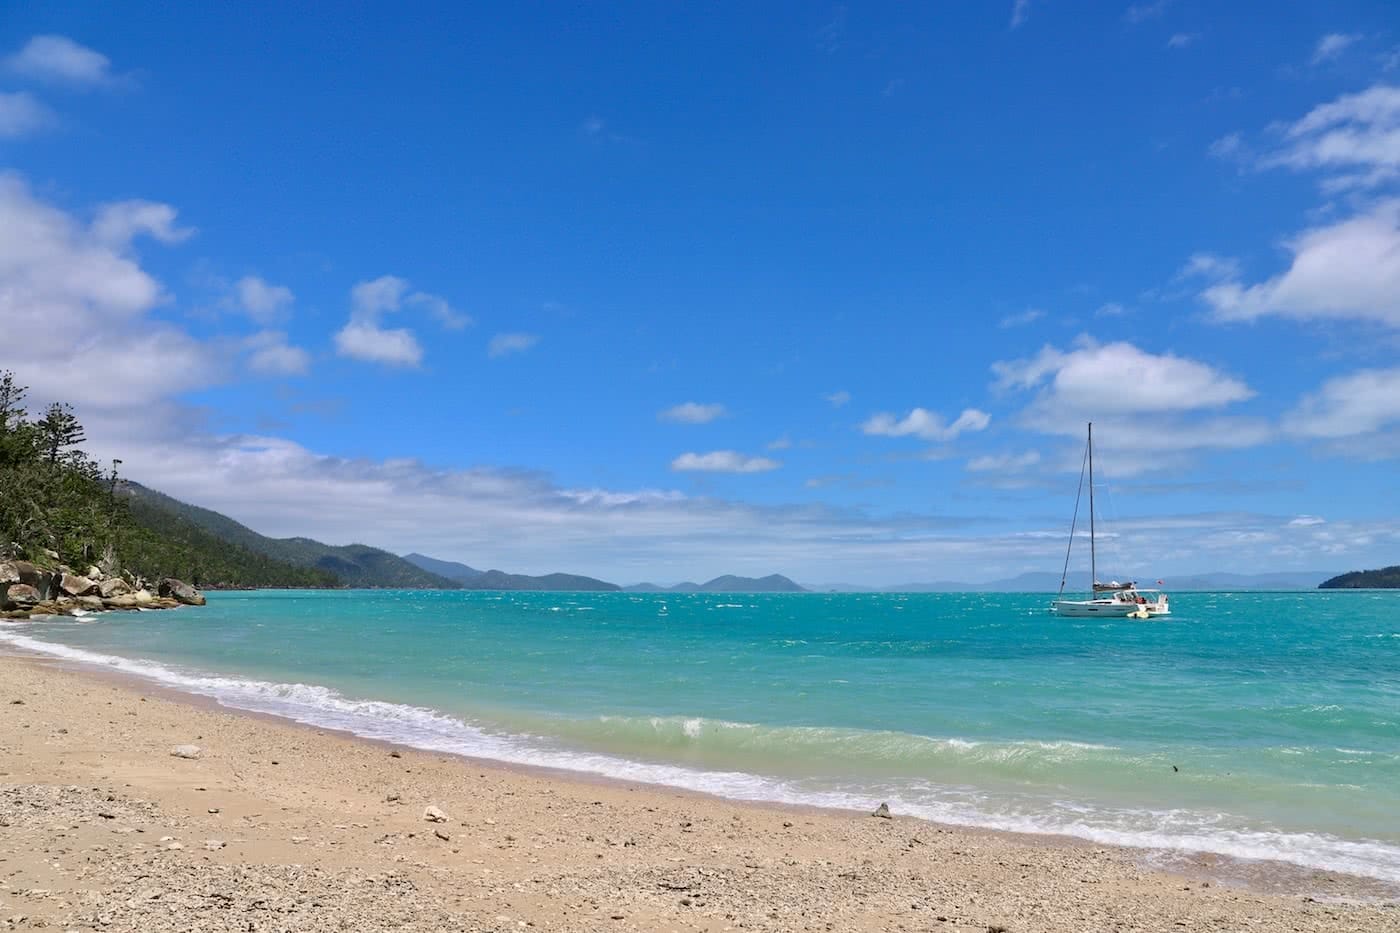 Camping The Whitsundays // Cairn Beach Campground (QLD), Solaye Snider, beach, turquoise, ocean, boat, sand, shore